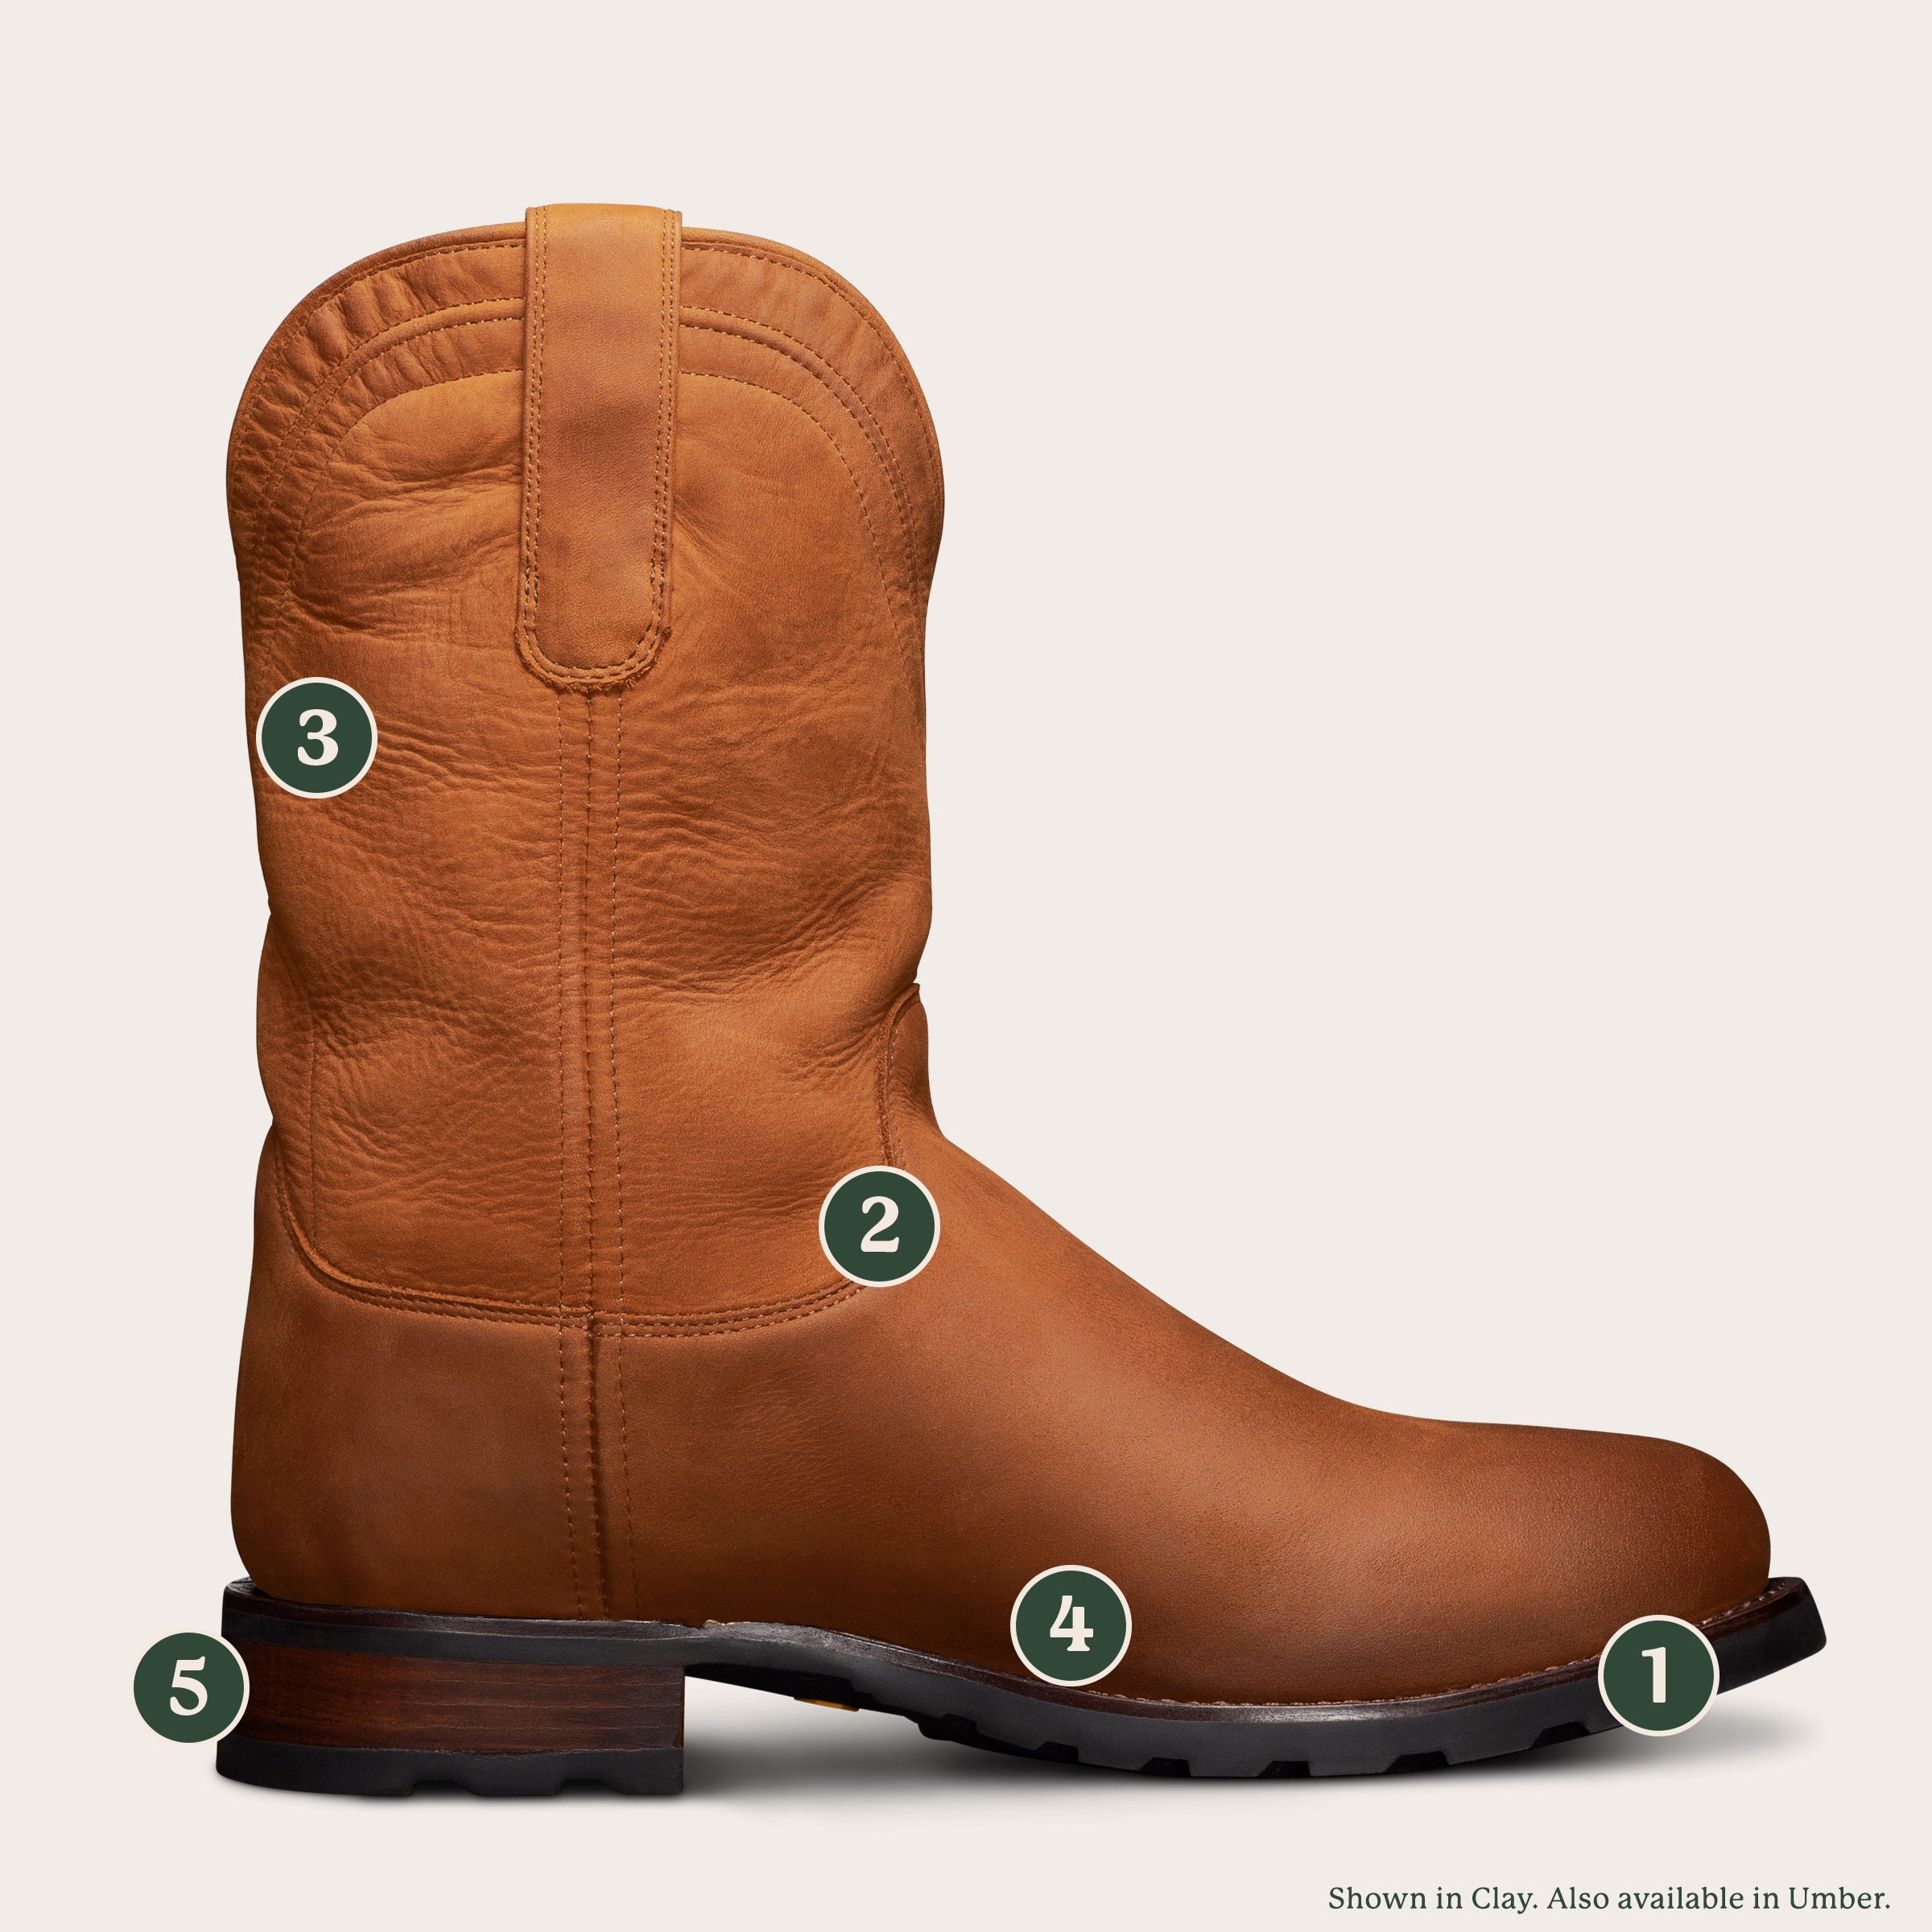 Ranch Wear - Ranch Boots, Jeans, and Apparel for Work | Tecovas